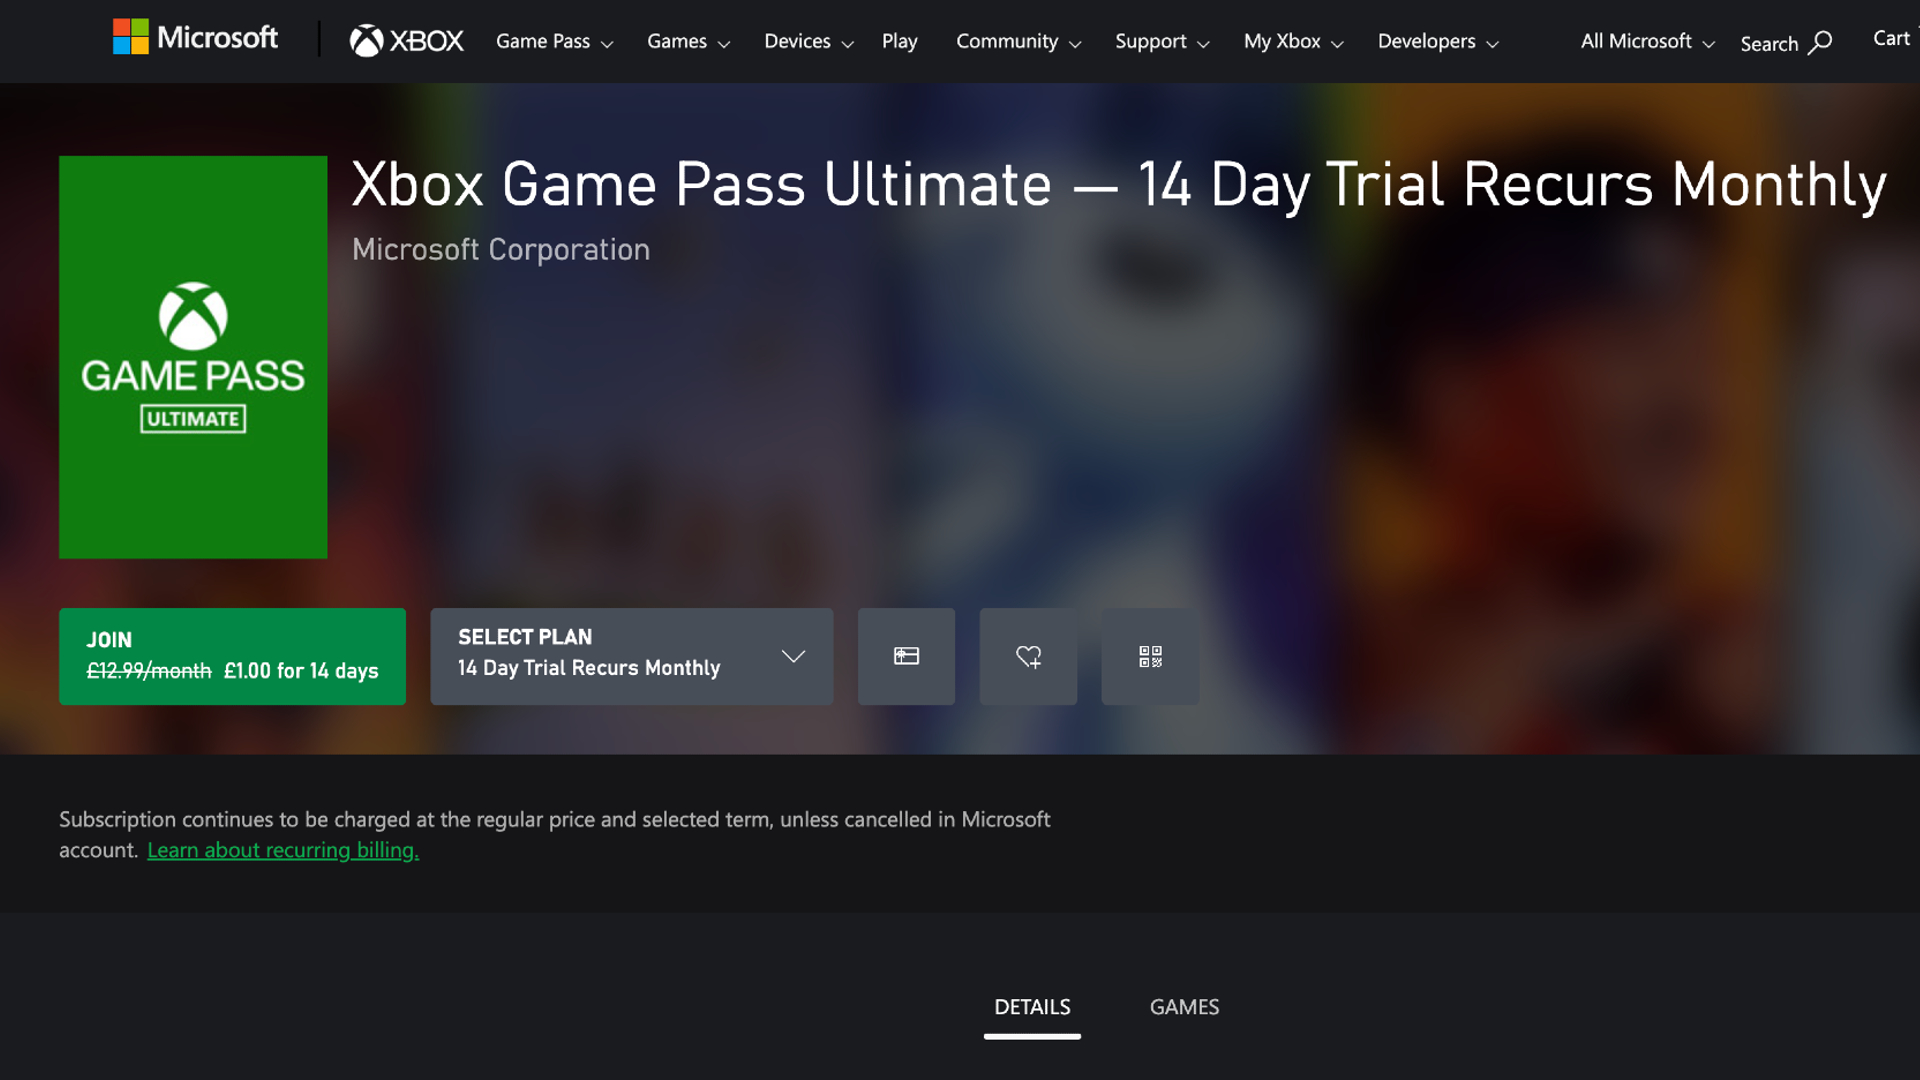 Xbox Game Pass price hike announced ahead of Starfield release